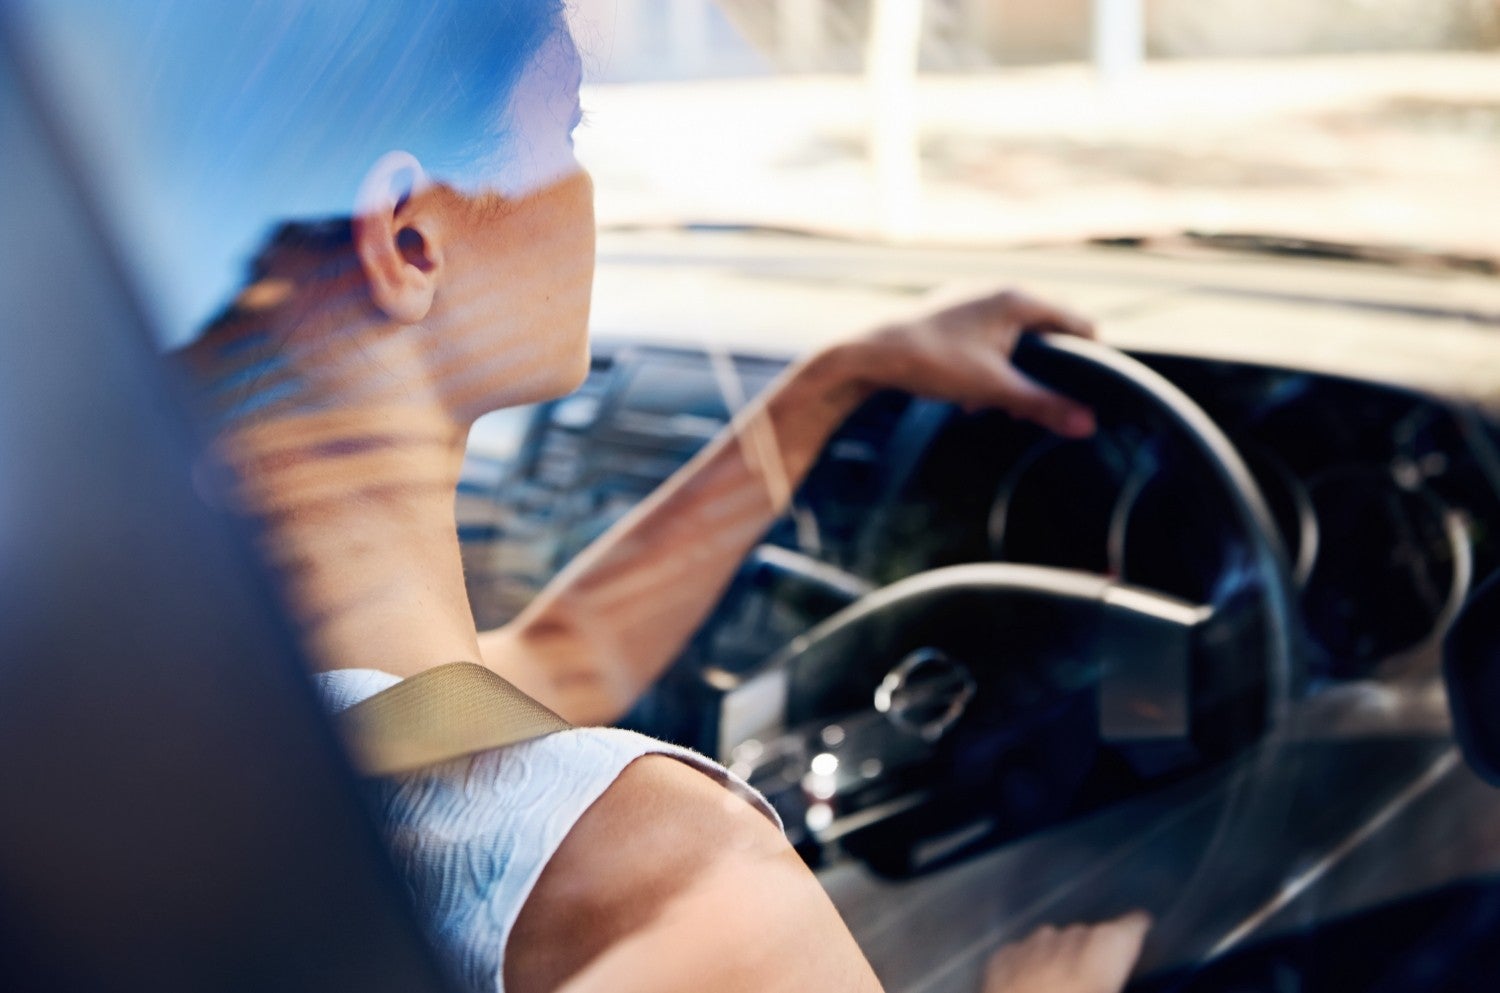 Over-the-shoulder image of a woman driving